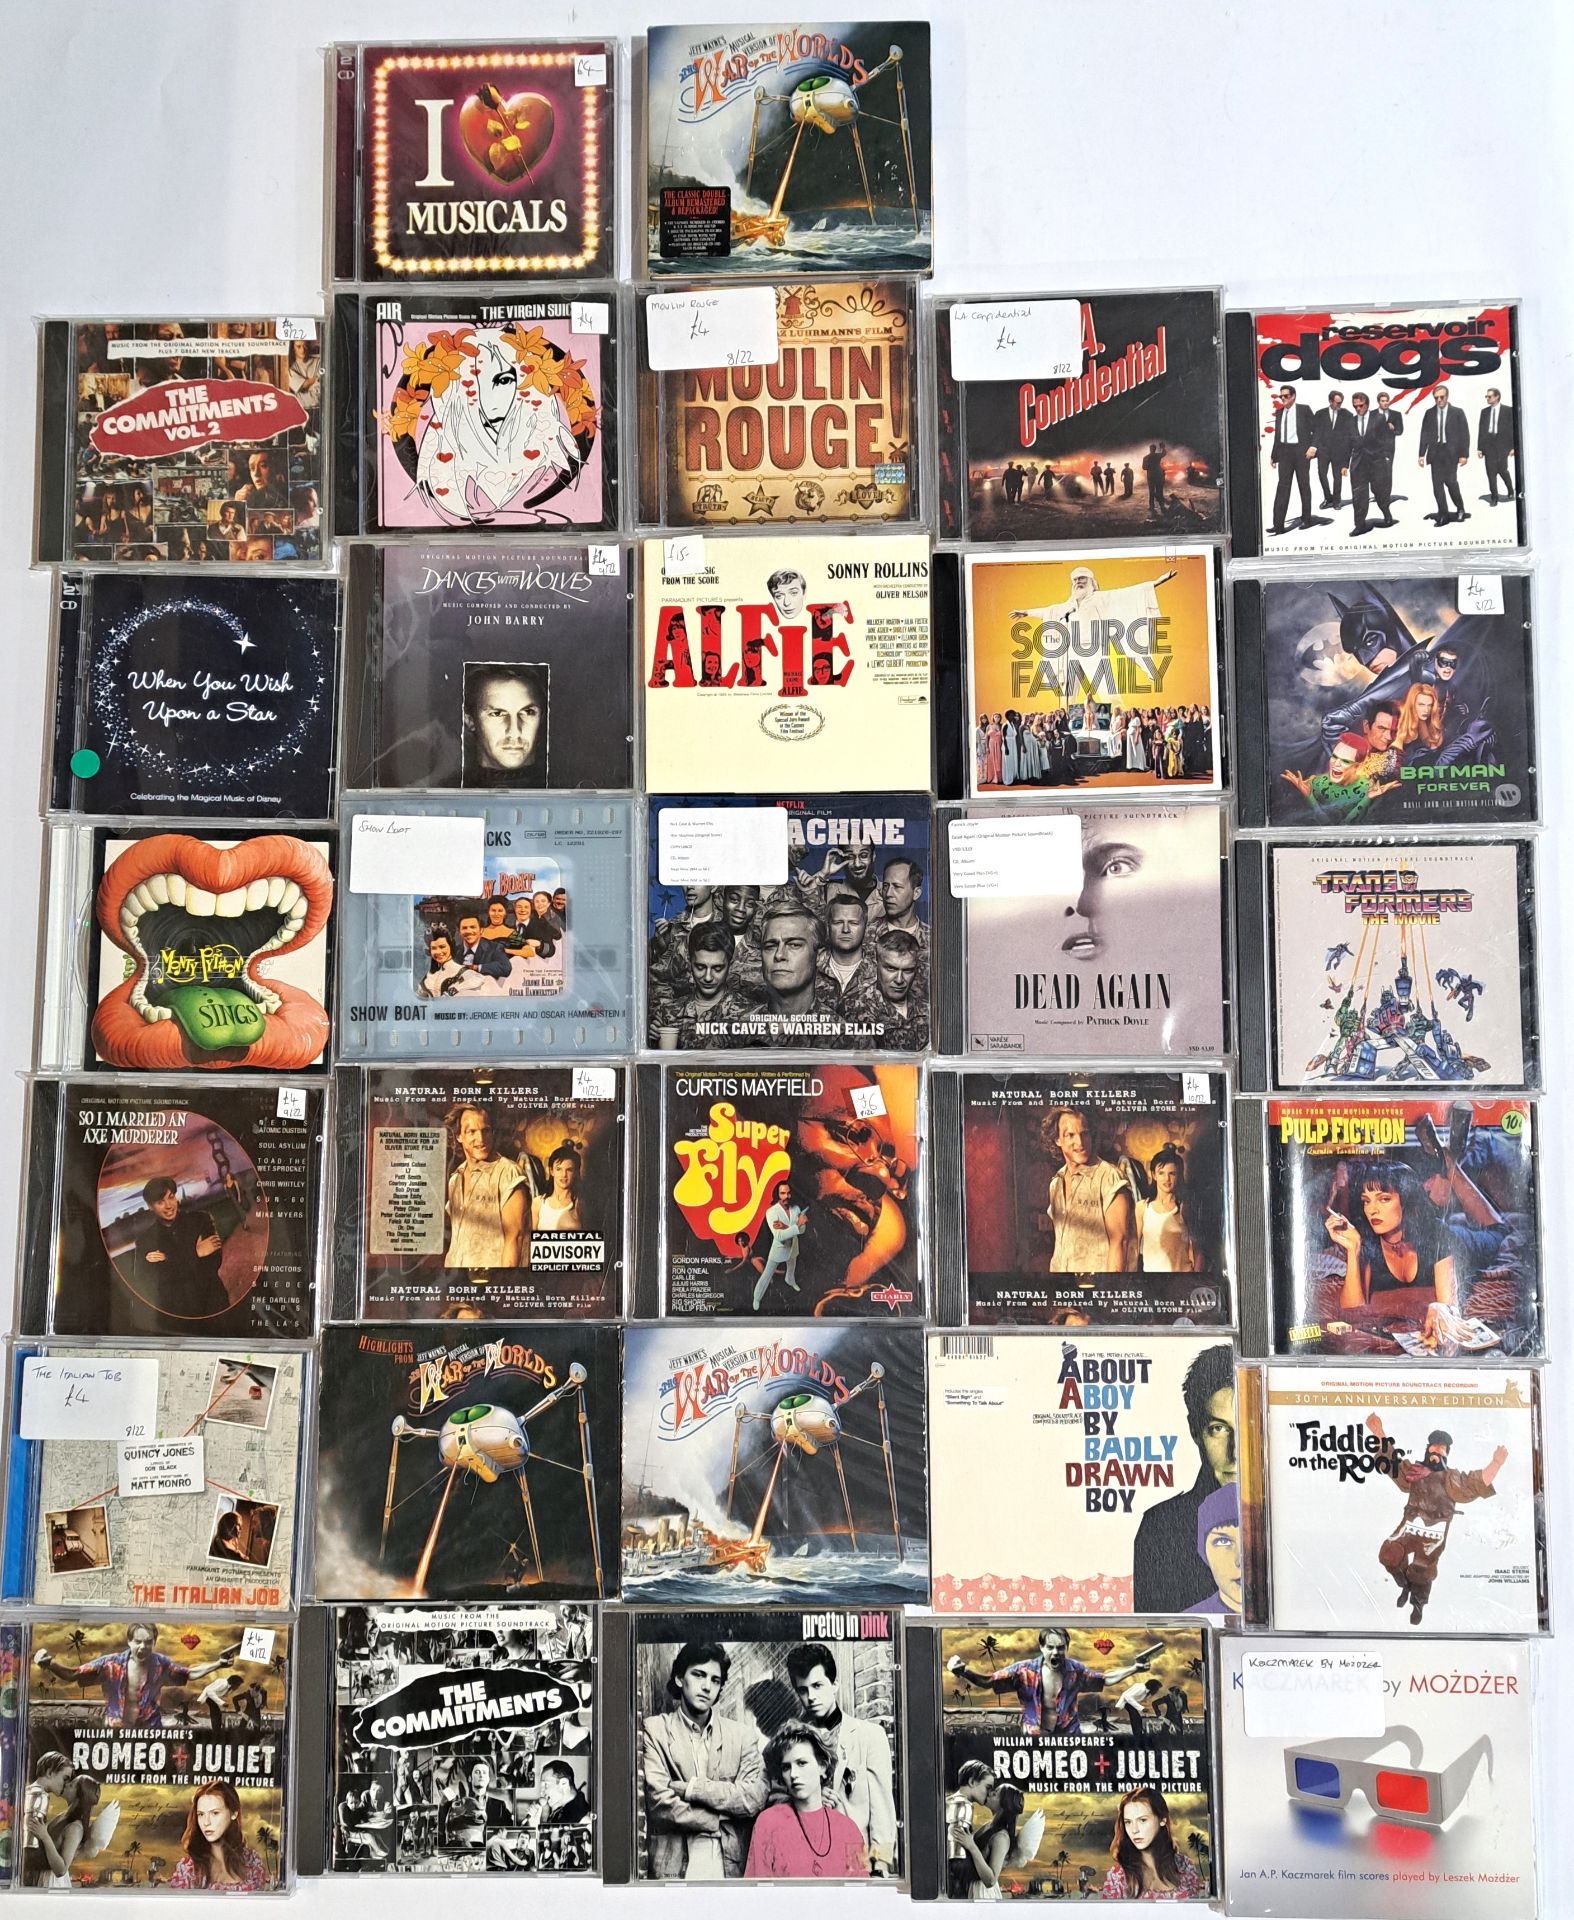 Screen/Film Soundtracks and similar, a group of CDs